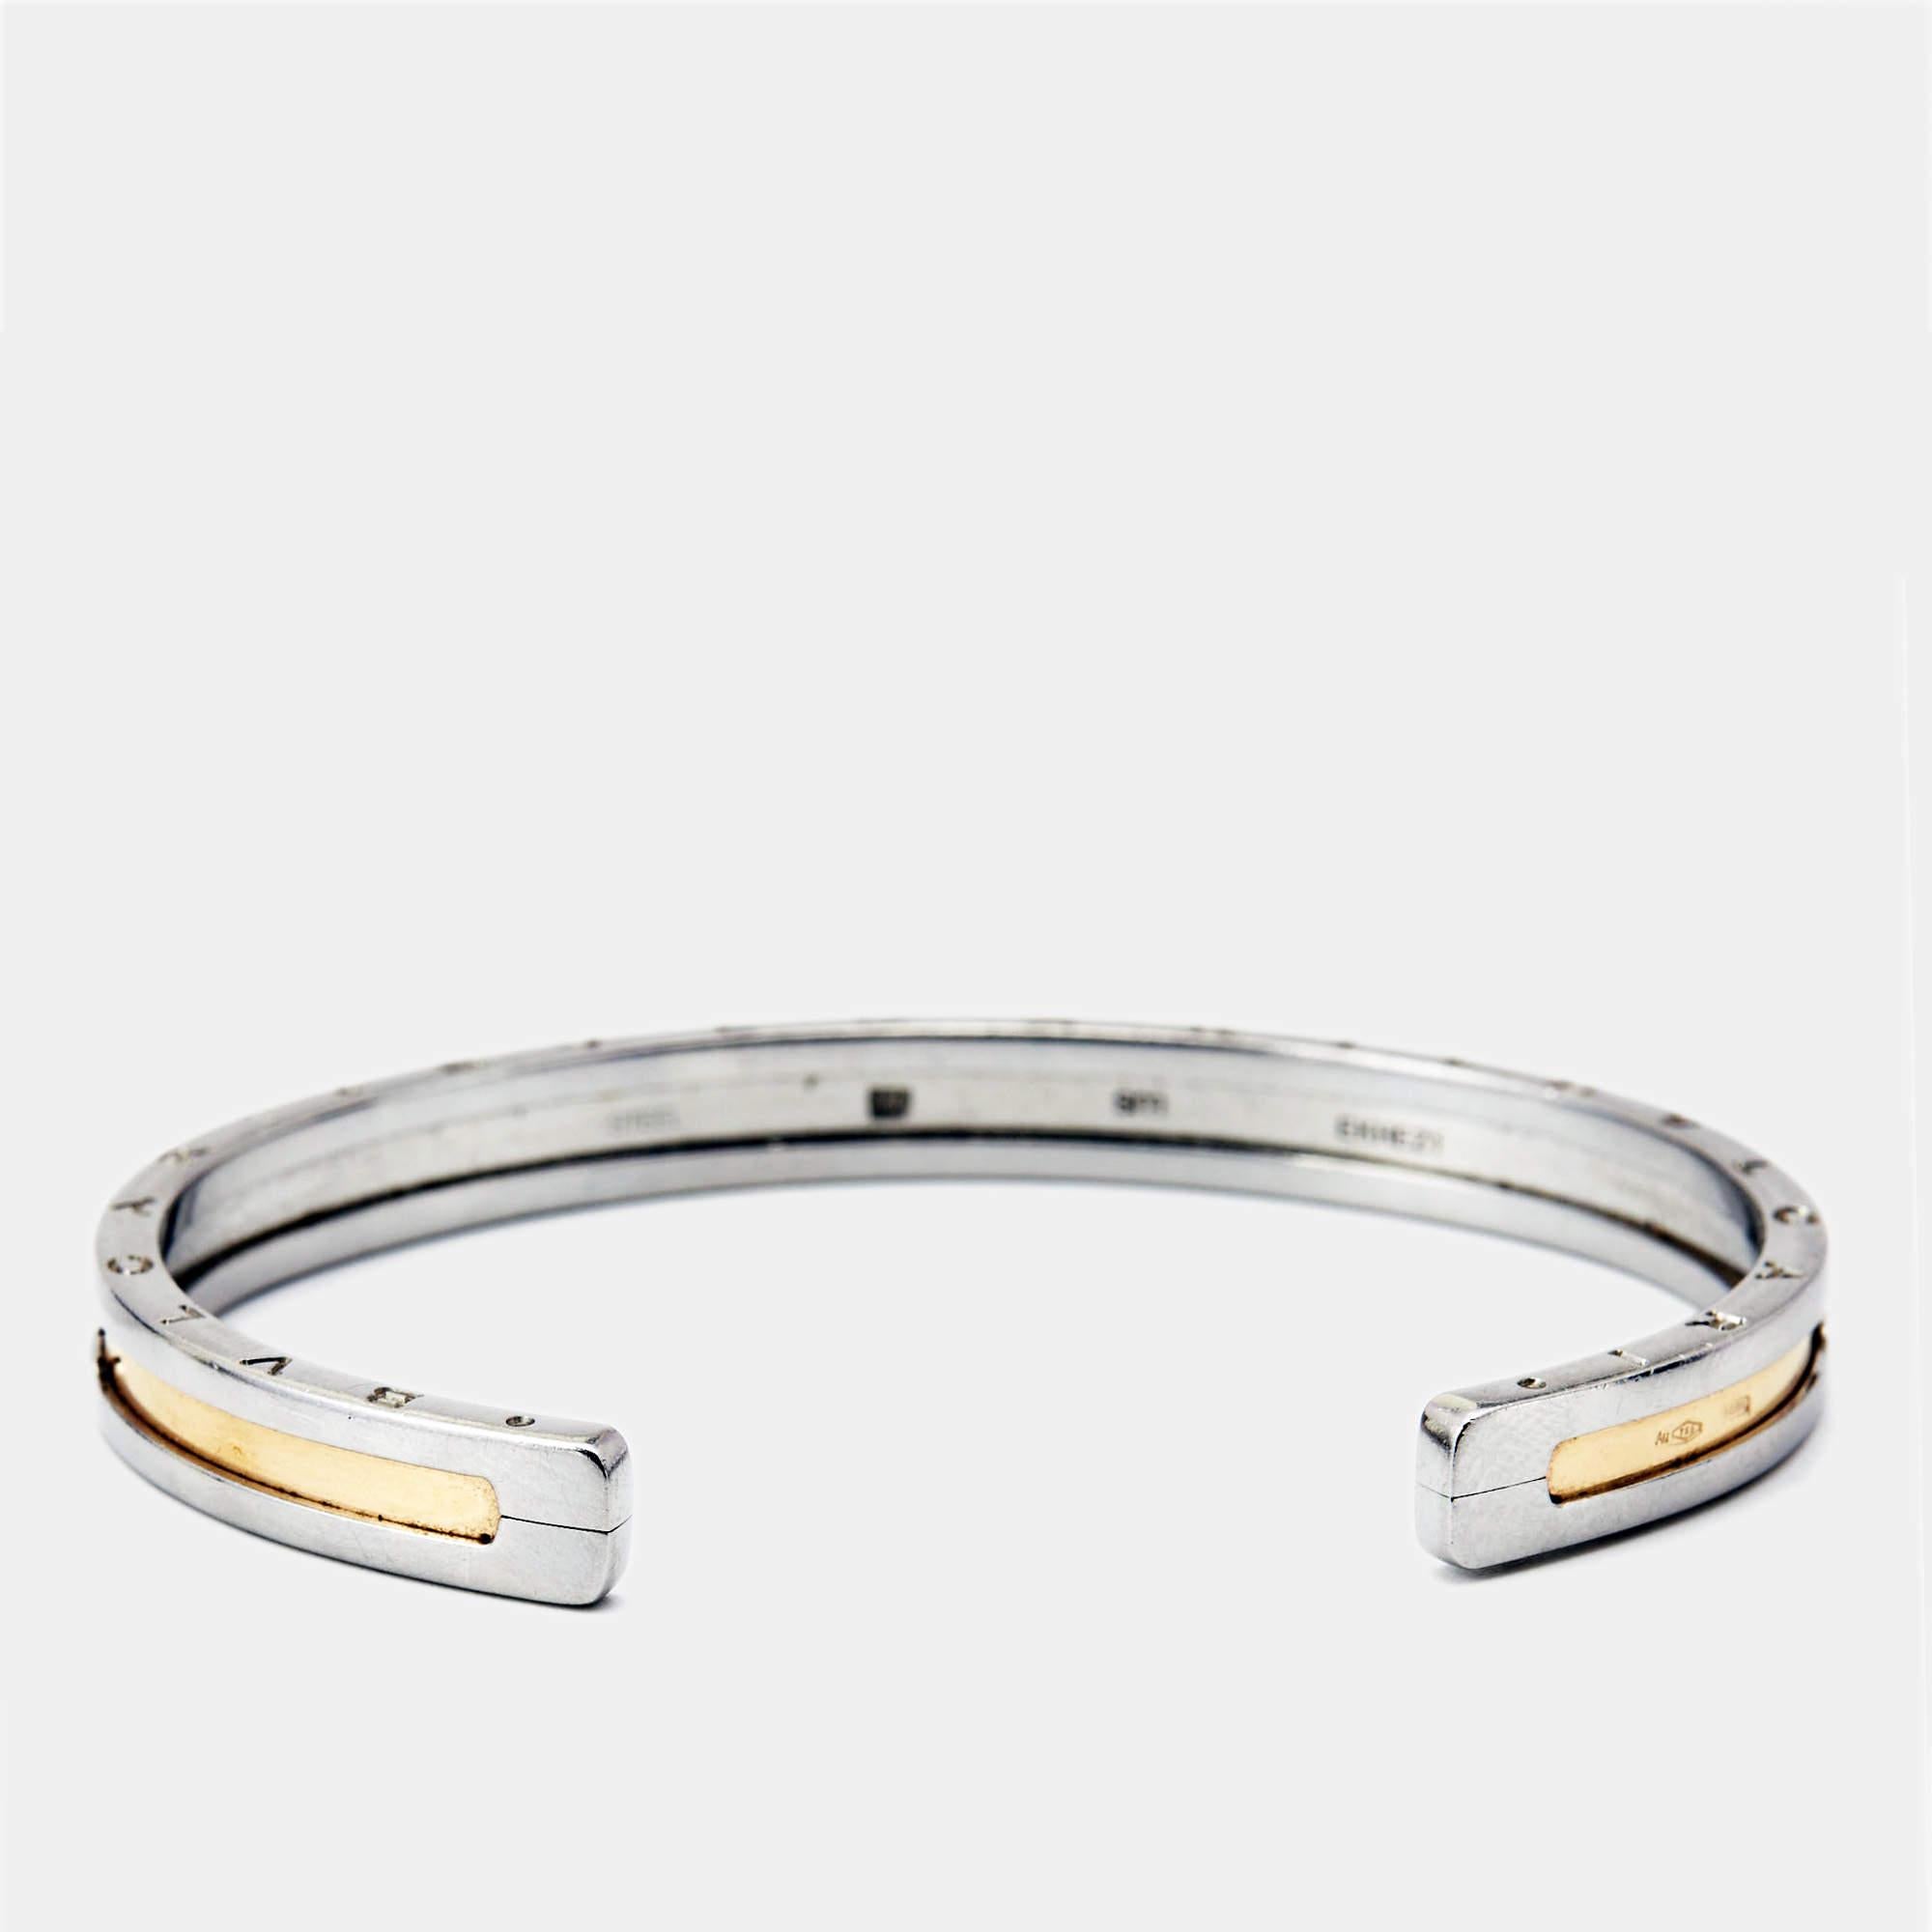 A classic Bvlgari B.Zero1 bracelet is so simple, effortless, and yet so chic and luxurious that it is worn over and over again once purchased. It never goes out of style. Constructed using stainless steel, it is beautified with 18k rose